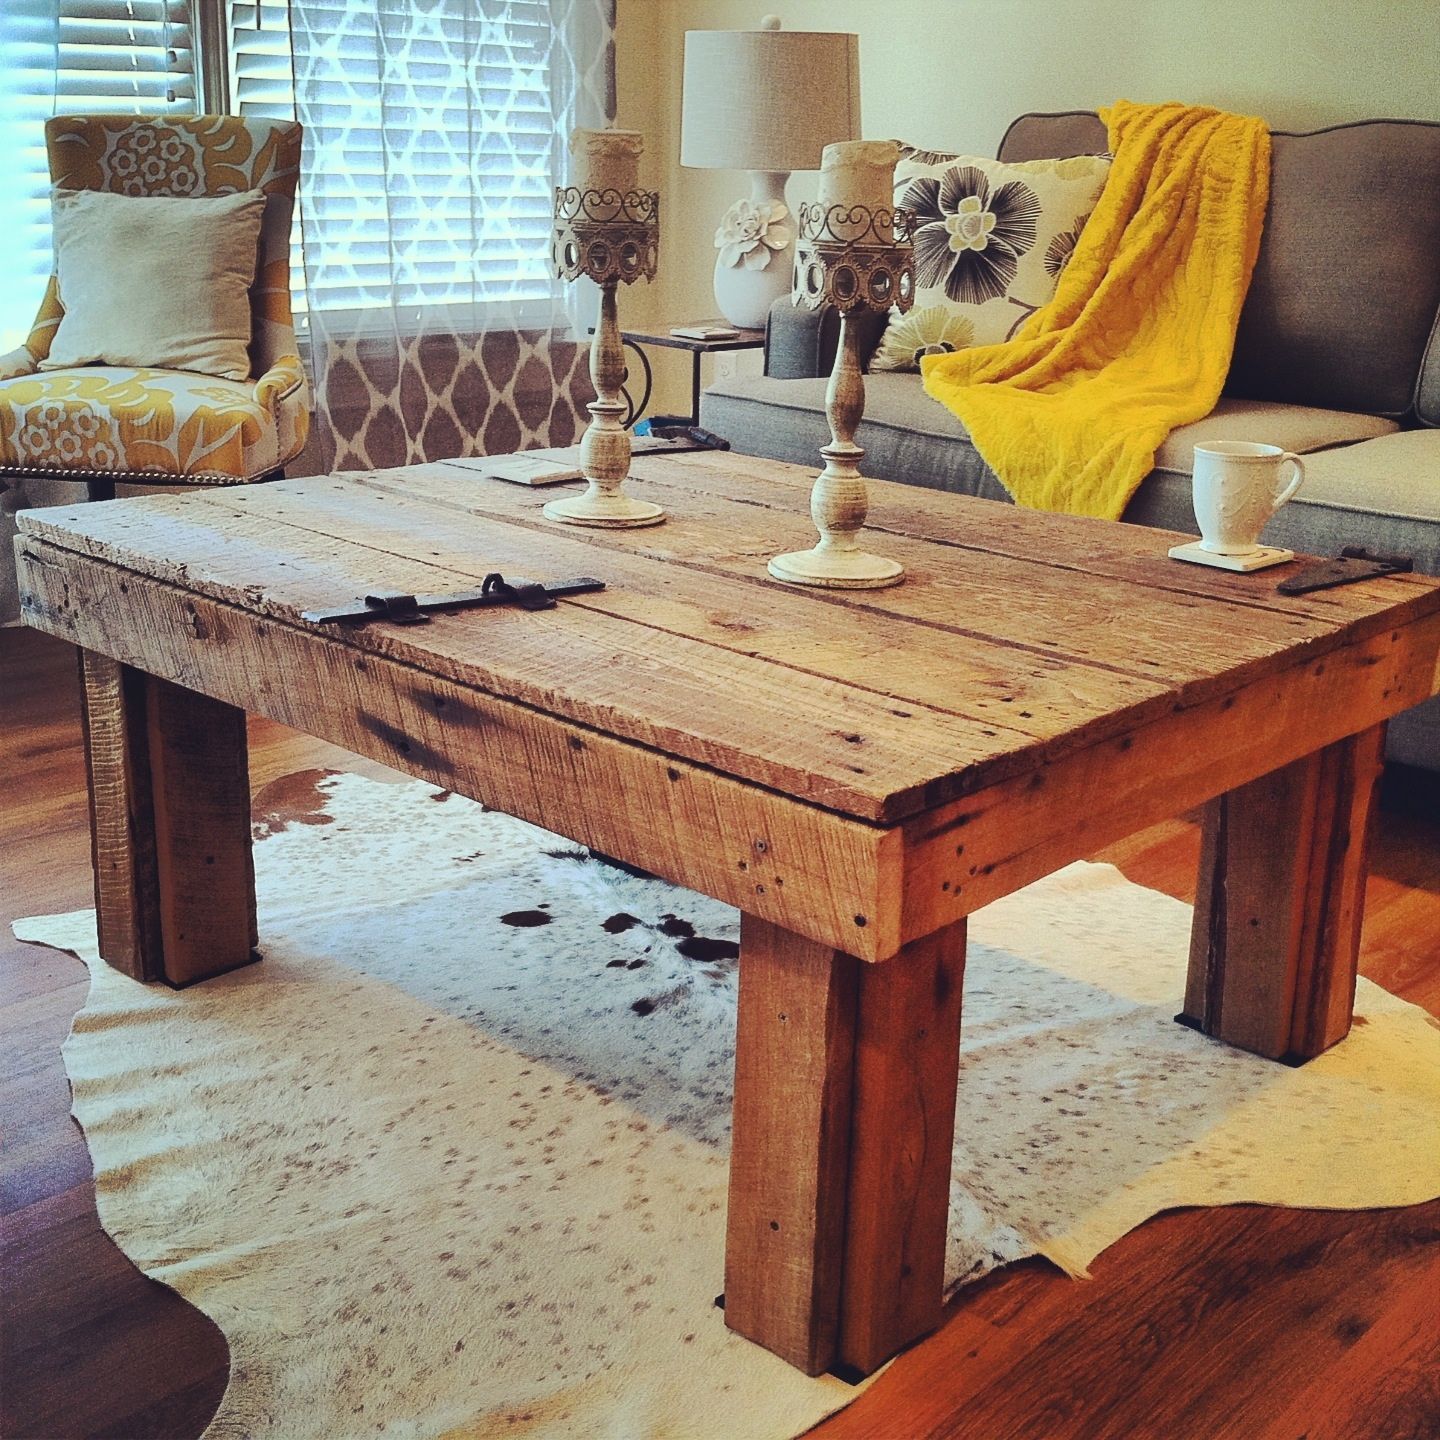 Barn Door Coffee Table Diy – Coffee Table Design Ideas Intended For Coffee Tables With Sliding Barn Doors (Gallery 19 of 20)